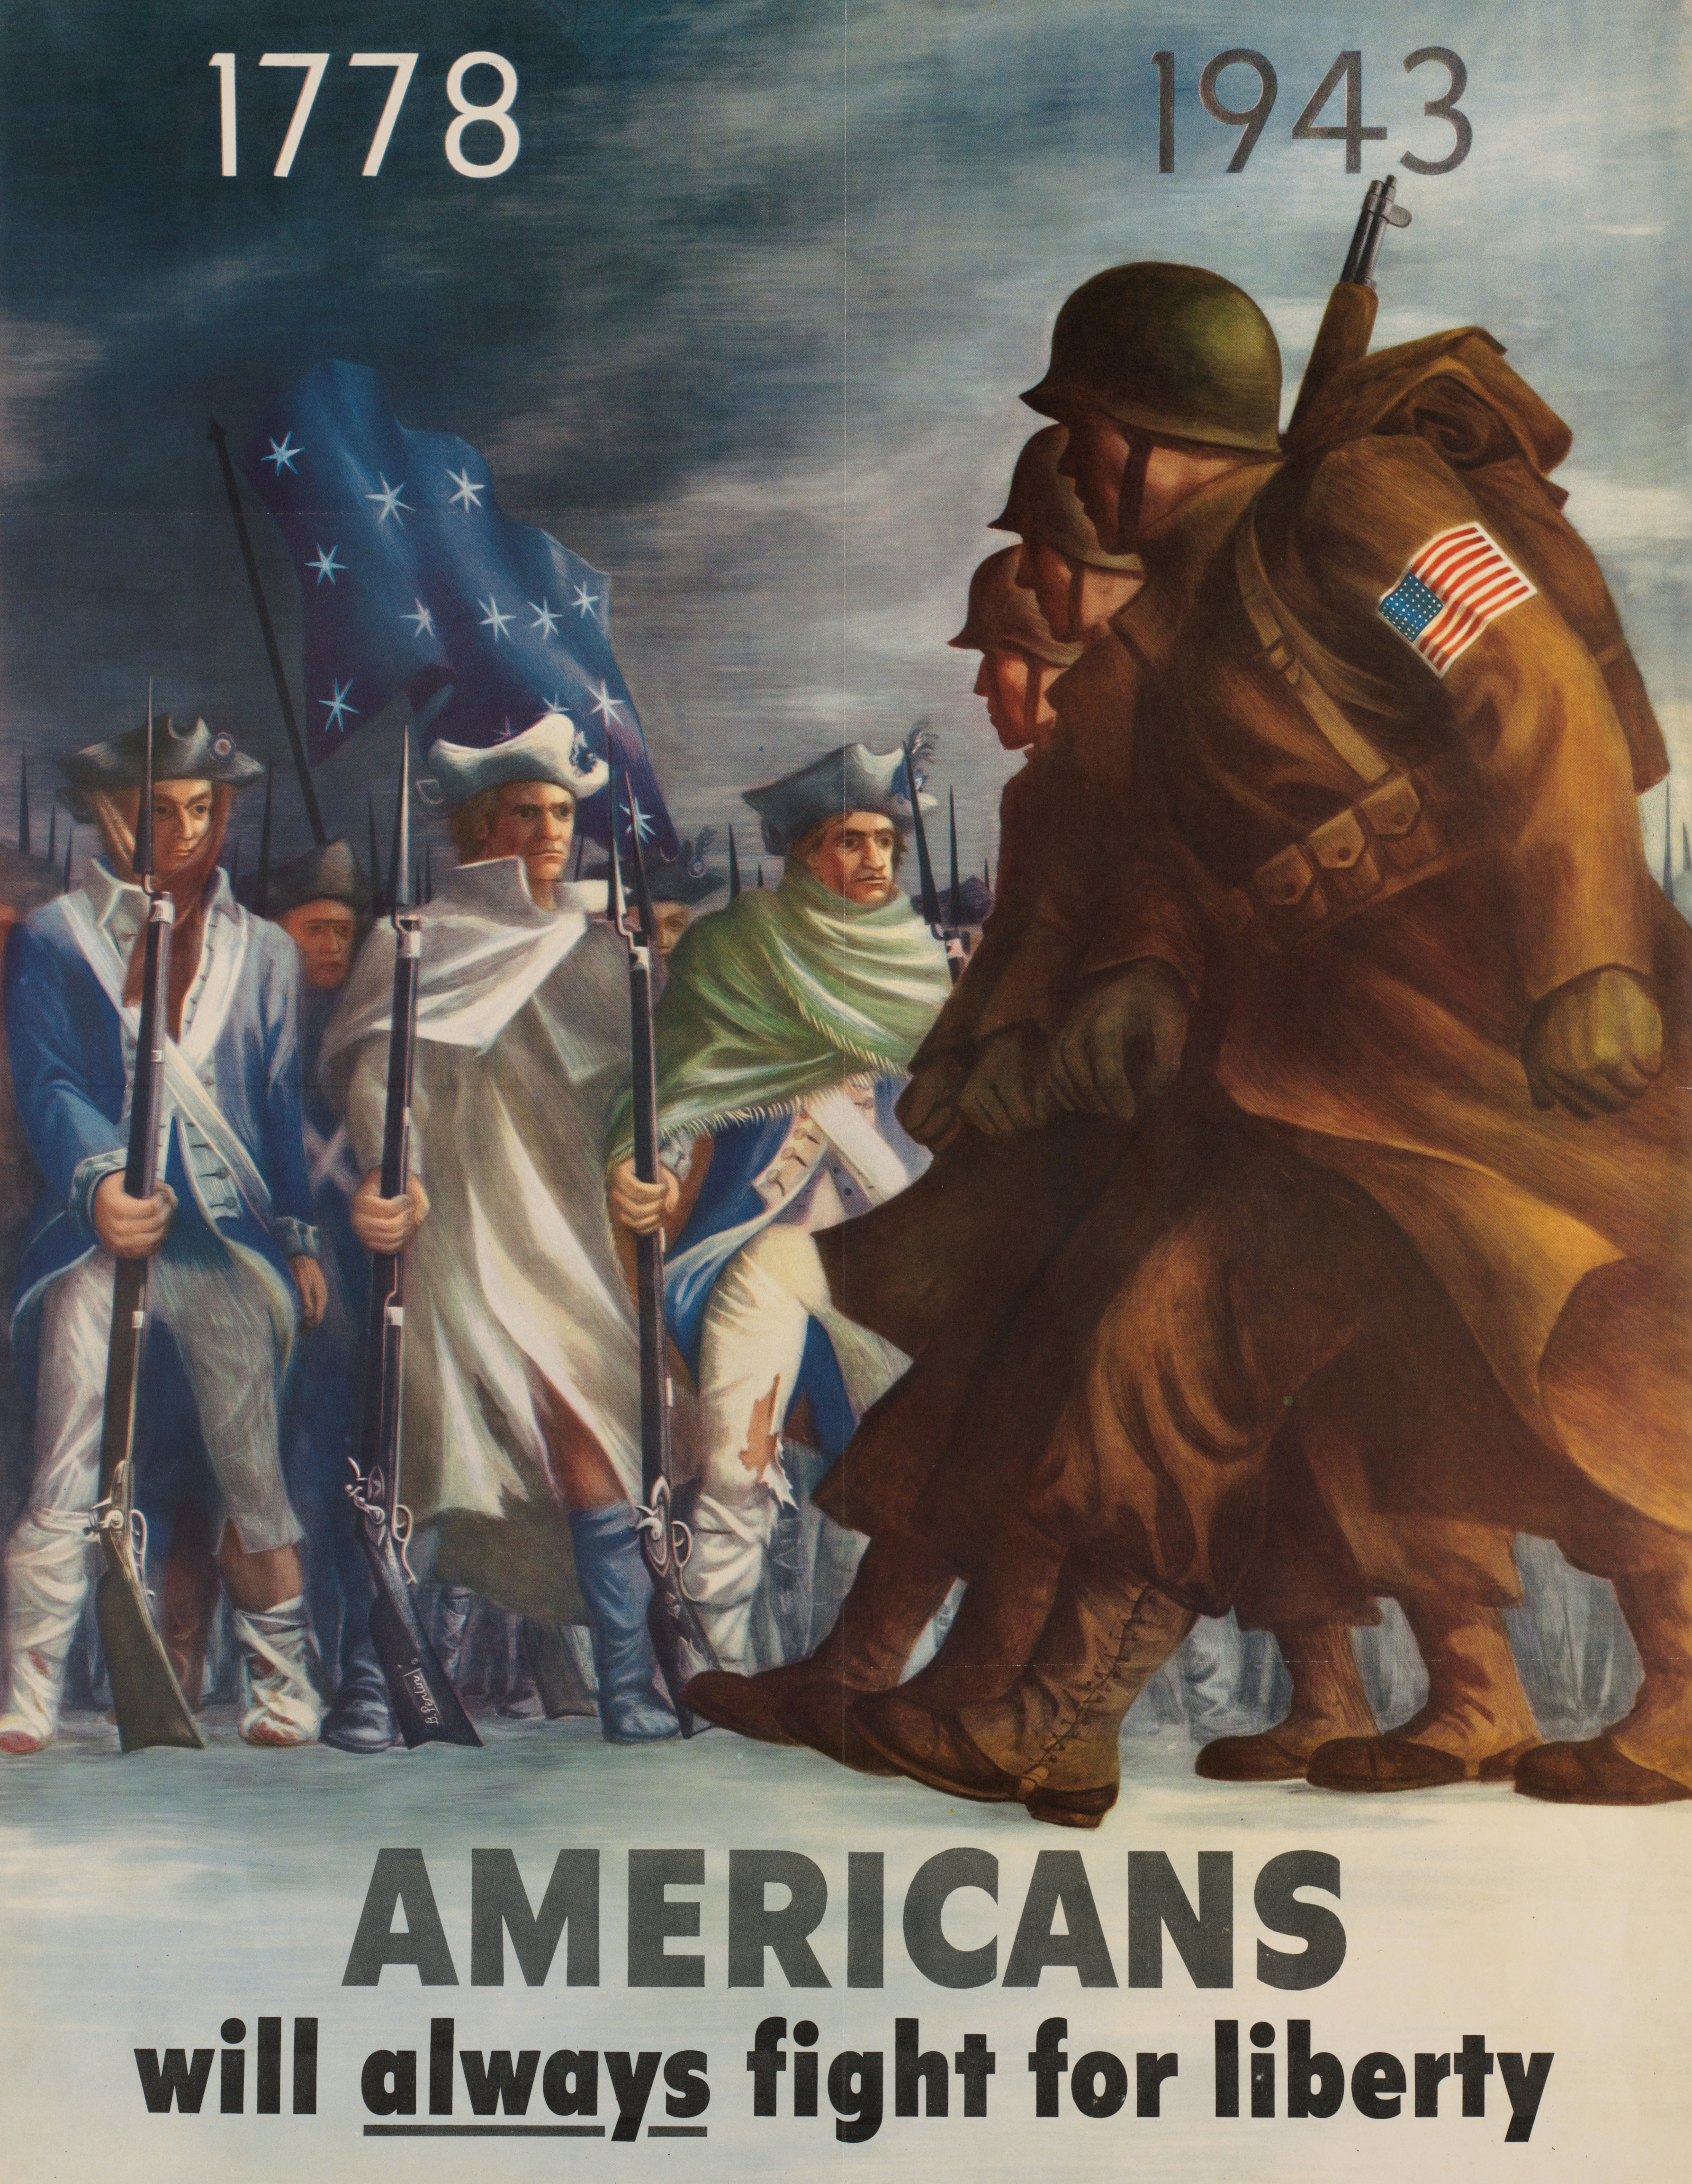 1778, 1943. Americans will always fight for liberty. United States soldiers in helmets and coats march past Revolutionary War militiamen with rifles. https://ark.digitalcommonwealth.org/ark:/50959/ft848t75w Please visit Digital Commonwealth to view more images: https://www.digitalcommonwealth.org.